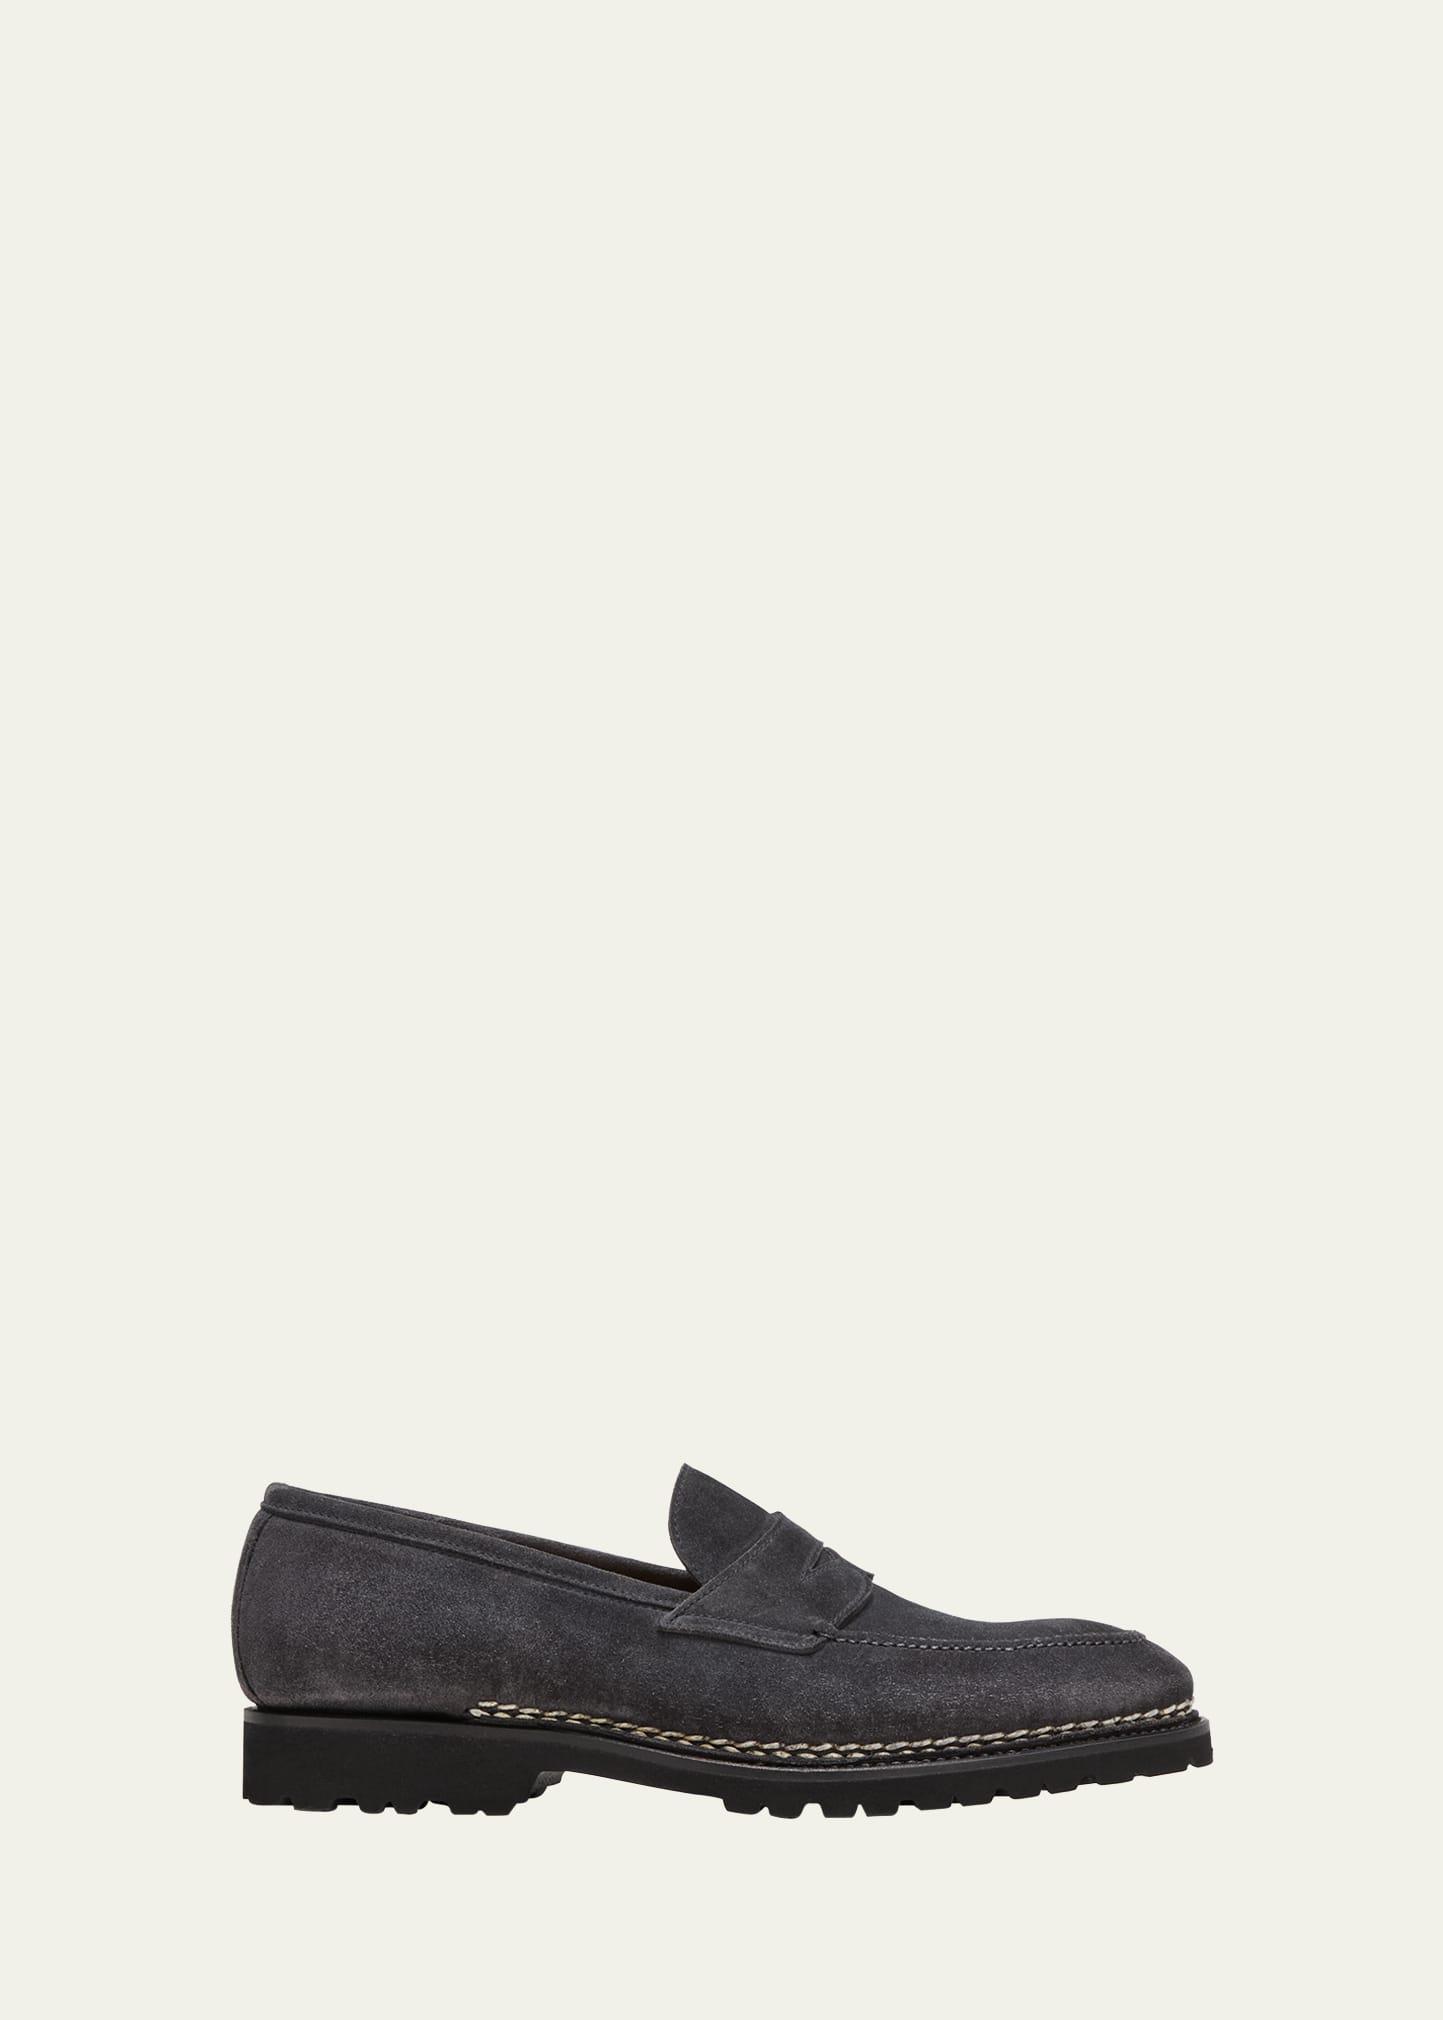 Mensy Calfskin Slip-On Loafers Product Image